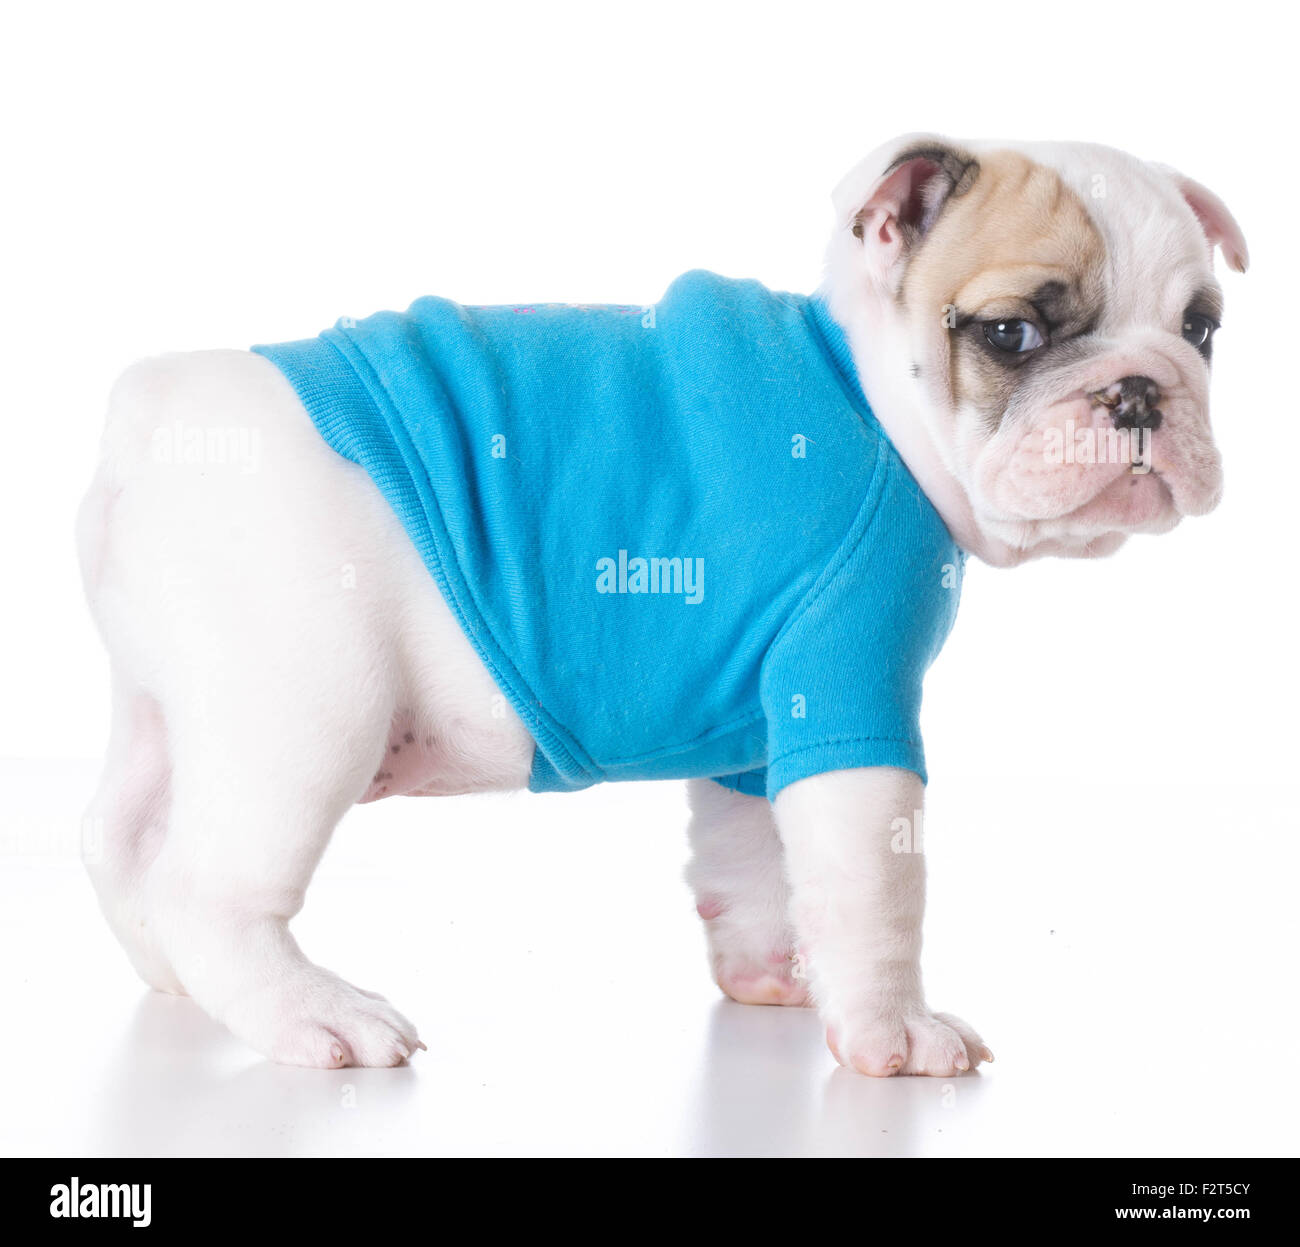 cute puppy - bulldog puppy wearing a blue sweater standing on white background 7 weeks old Stock Photo